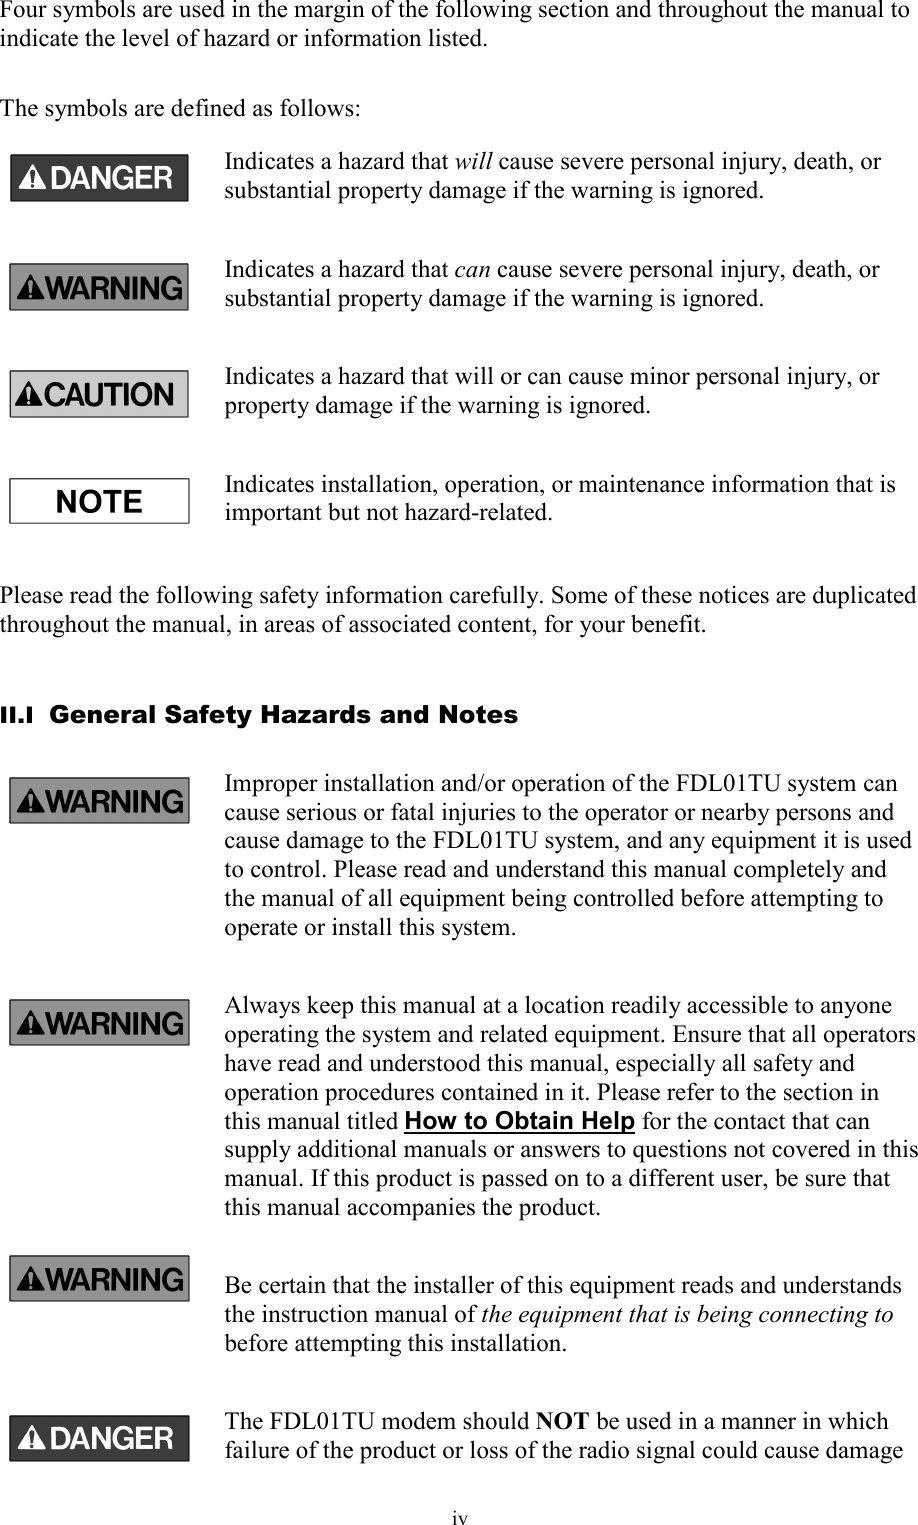   iv Four symbols are used in the margin of the following section and throughout the manual to indicate the level of hazard or information listed.  The symbols are defined as follows: Indicates a hazard that will cause severe personal injury, death, or substantial property damage if the warning is ignored. Indicates a hazard that can cause severe personal injury, death, or substantial property damage if the warning is ignored. Indicates a hazard that will or can cause minor personal injury, or property damage if the warning is ignored. Indicates installation, operation, or maintenance information that is important but not hazard-related.  Please read the following safety information carefully. Some of these notices are duplicated throughout the manual, in areas of associated content, for your benefit.  II.I  General Safety Hazards and Notes Improper installation and/or operation of the FDL01TU system can cause serious or fatal injuries to the operator or nearby persons and cause damage to the FDL01TU system, and any equipment it is used to control. Please read and understand this manual completely and the manual of all equipment being controlled before attempting to operate or install this system. Always keep this manual at a location readily accessible to anyone operating the system and related equipment. Ensure that all operators have read and understood this manual, especially all safety and operation procedures contained in it. Please refer to the section in this manual titled How to Obtain Help for the contact that can supply additional manuals or answers to questions not covered in this manual. If this product is passed on to a different user, be sure that this manual accompanies the product. Be certain that the installer of this equipment reads and understands the instruction manual of the equipment that is being connecting to before attempting this installation. The FDL01TU modem should NOT be used in a manner in which failure of the product or loss of the radio signal could cause damage 